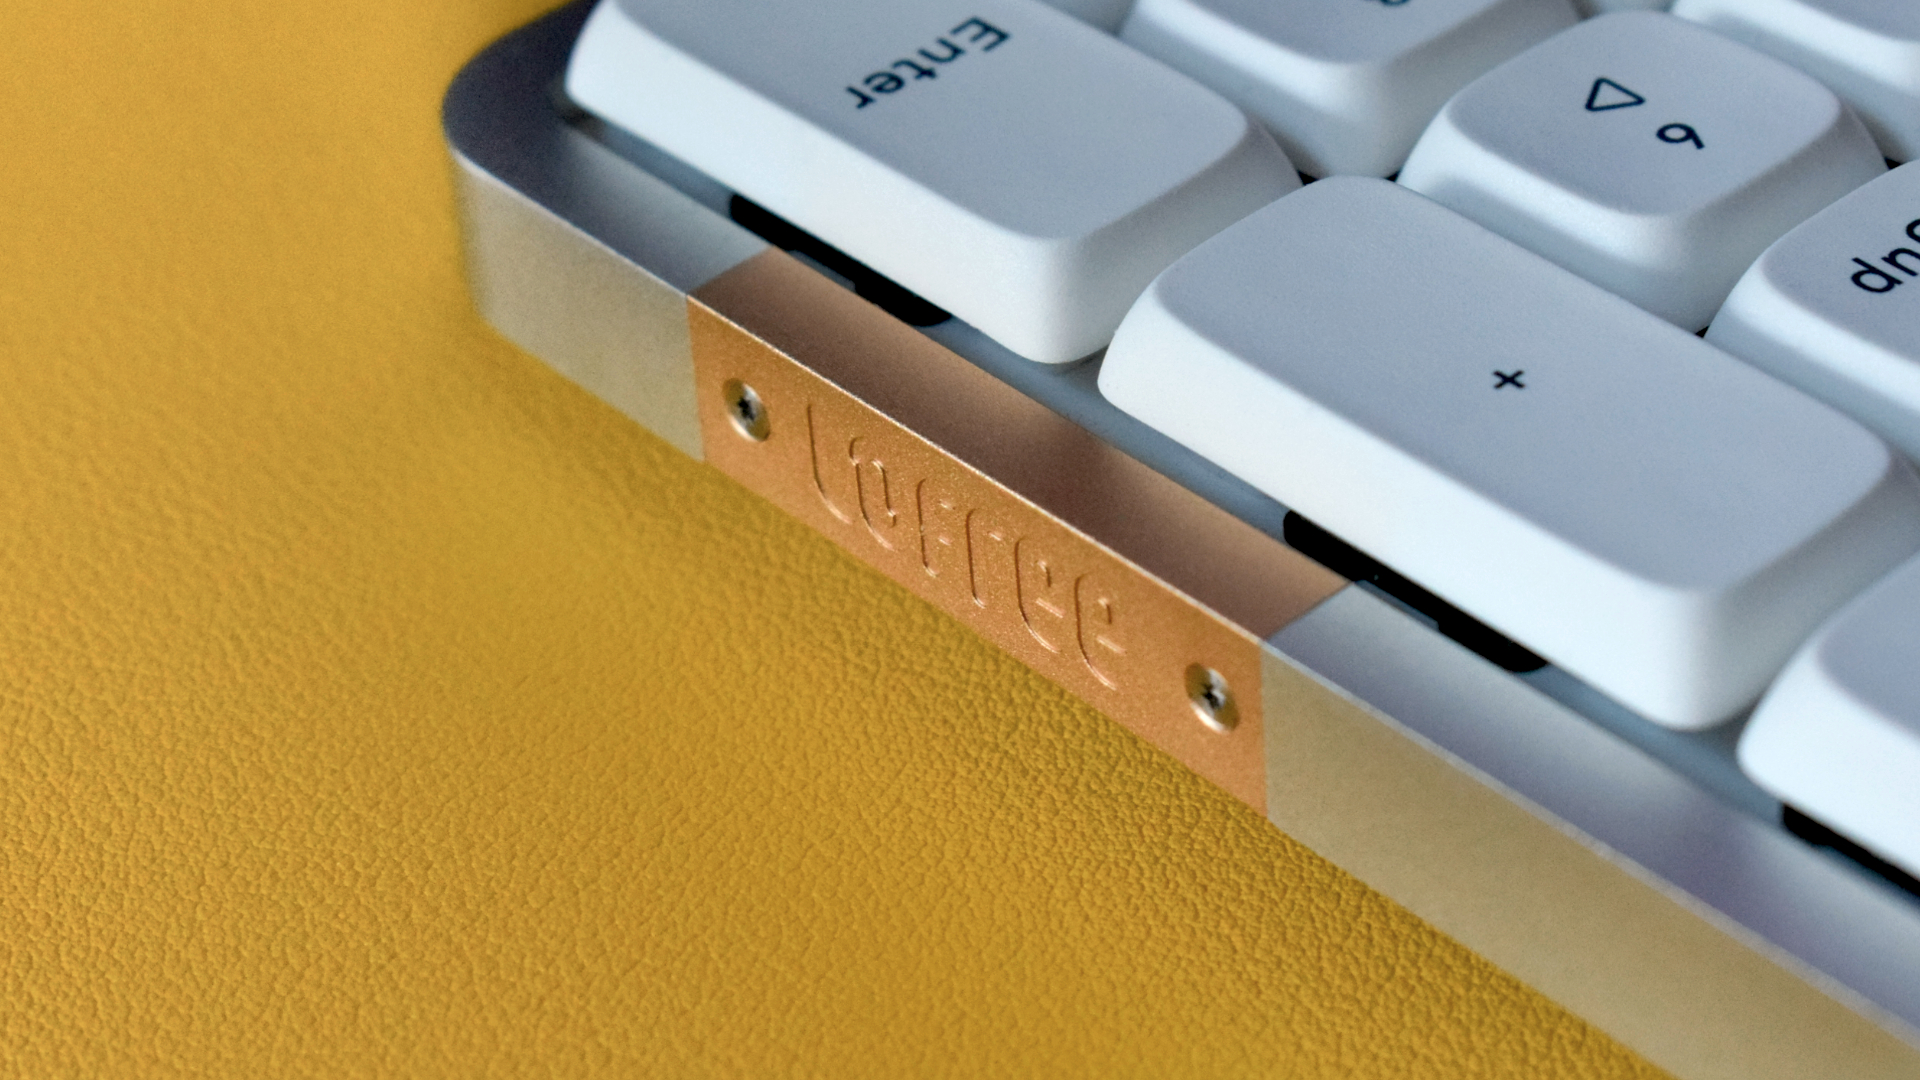 Lofree Flow mechanical wireless keyboard photograph showing gold/brass accented panel with Lofree branding on keyboard close up